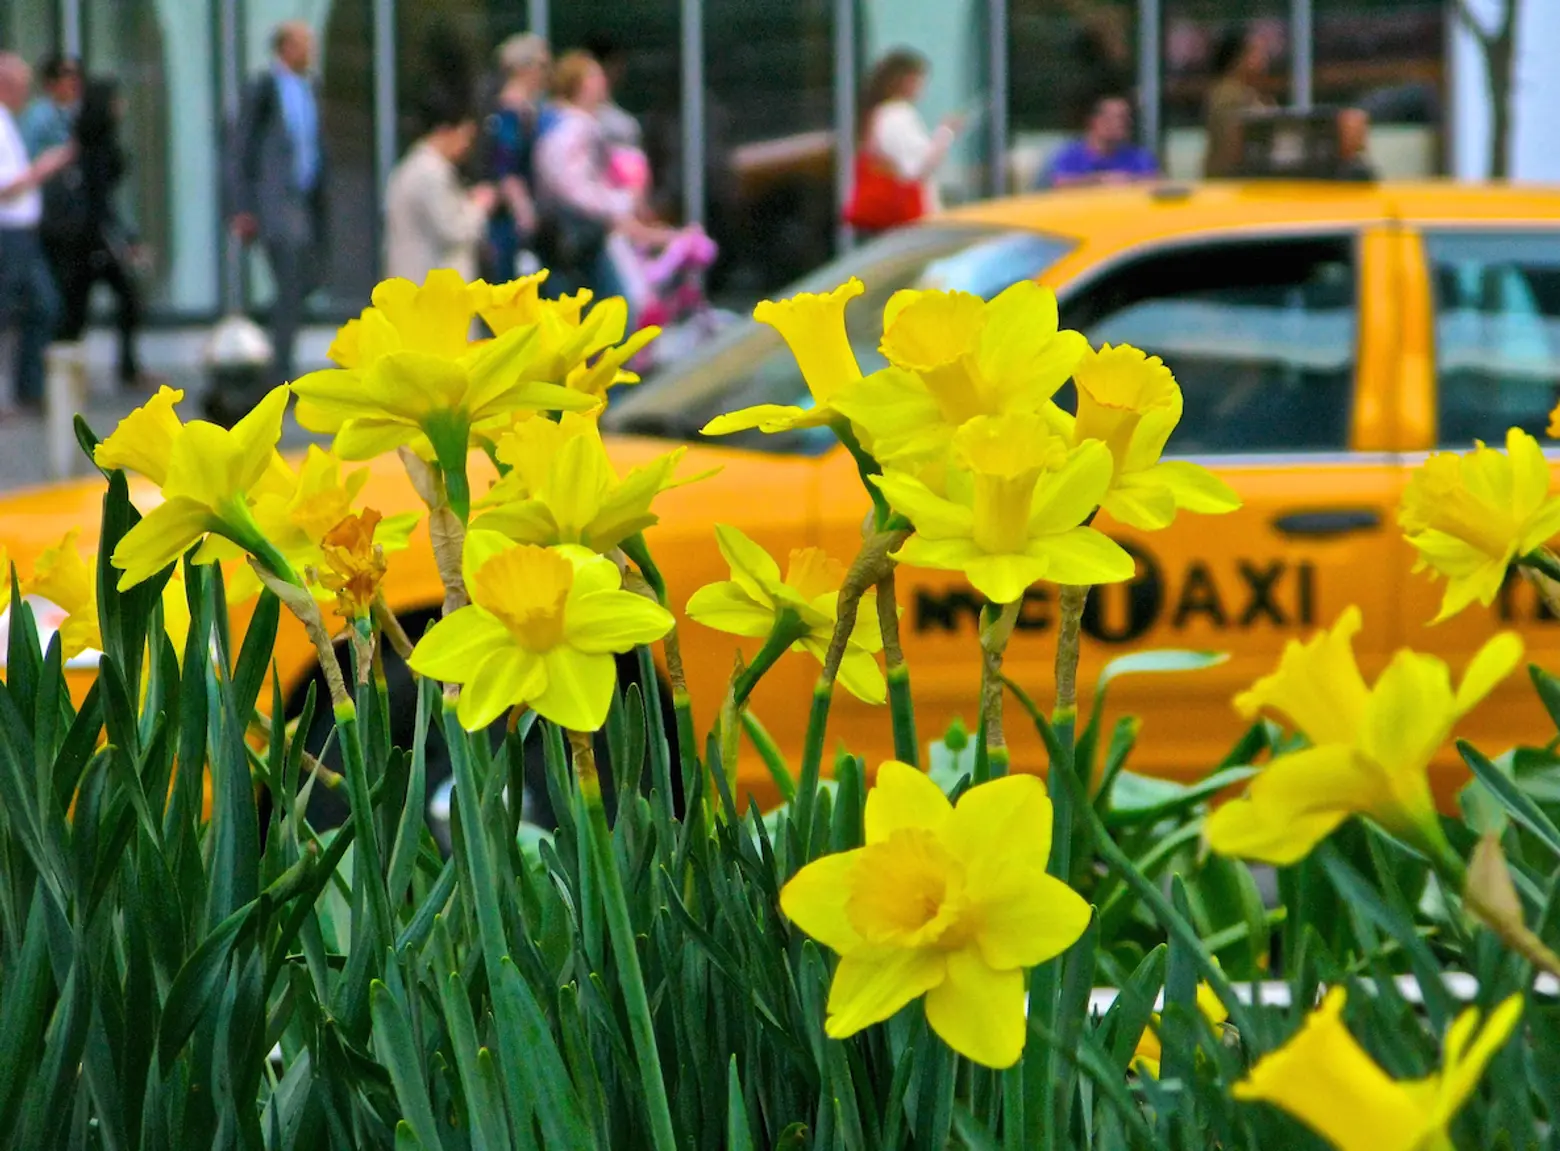 Daffodils to be planted across NYC to honor New Yorkers lost to 9/11 and Covid